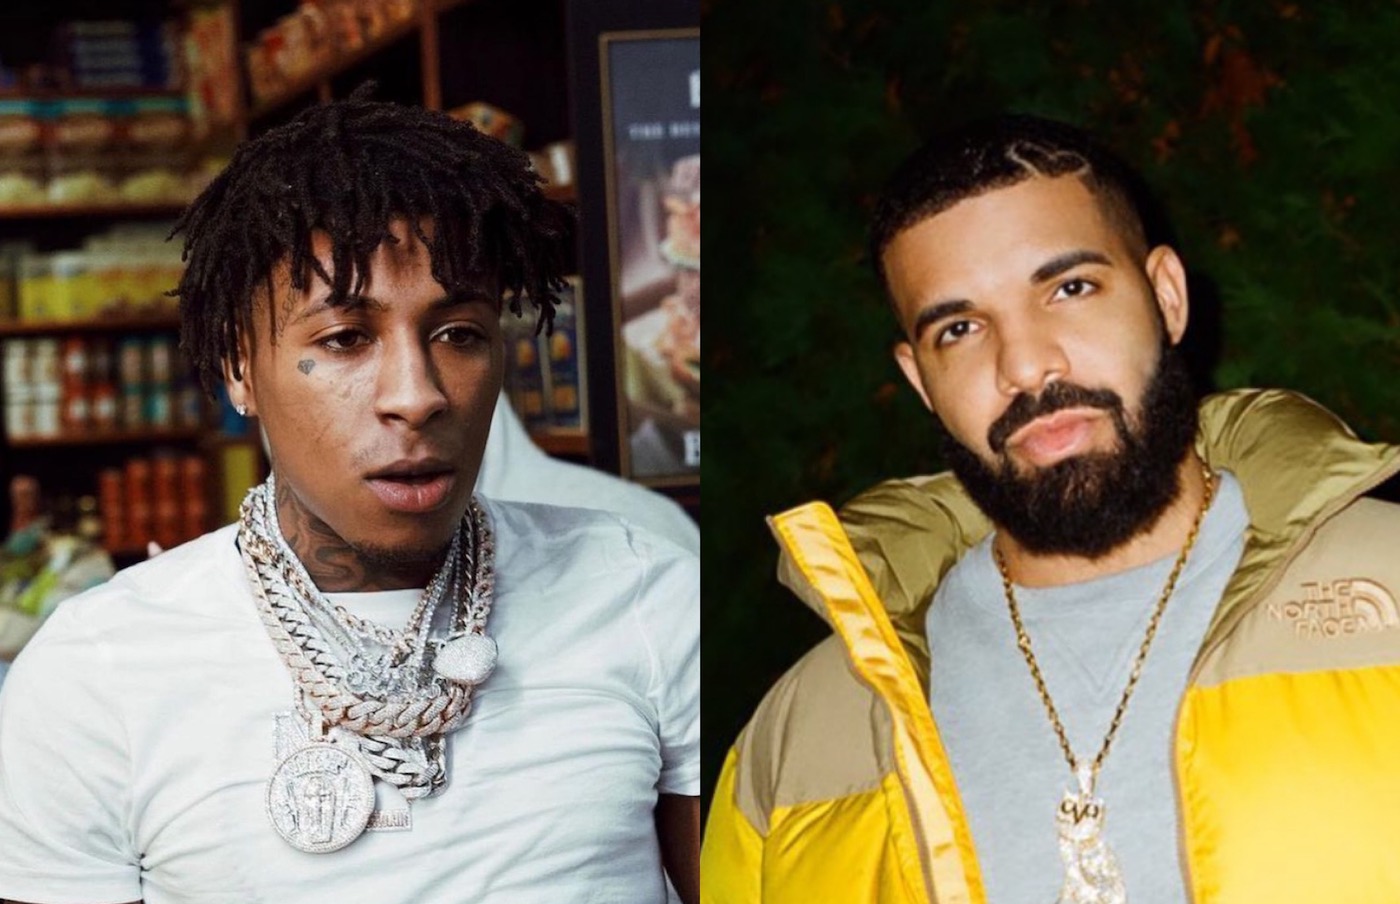 NBA YoungBoy Joins Drake As Only Artists With 4 billion Streams In 2022 So Far